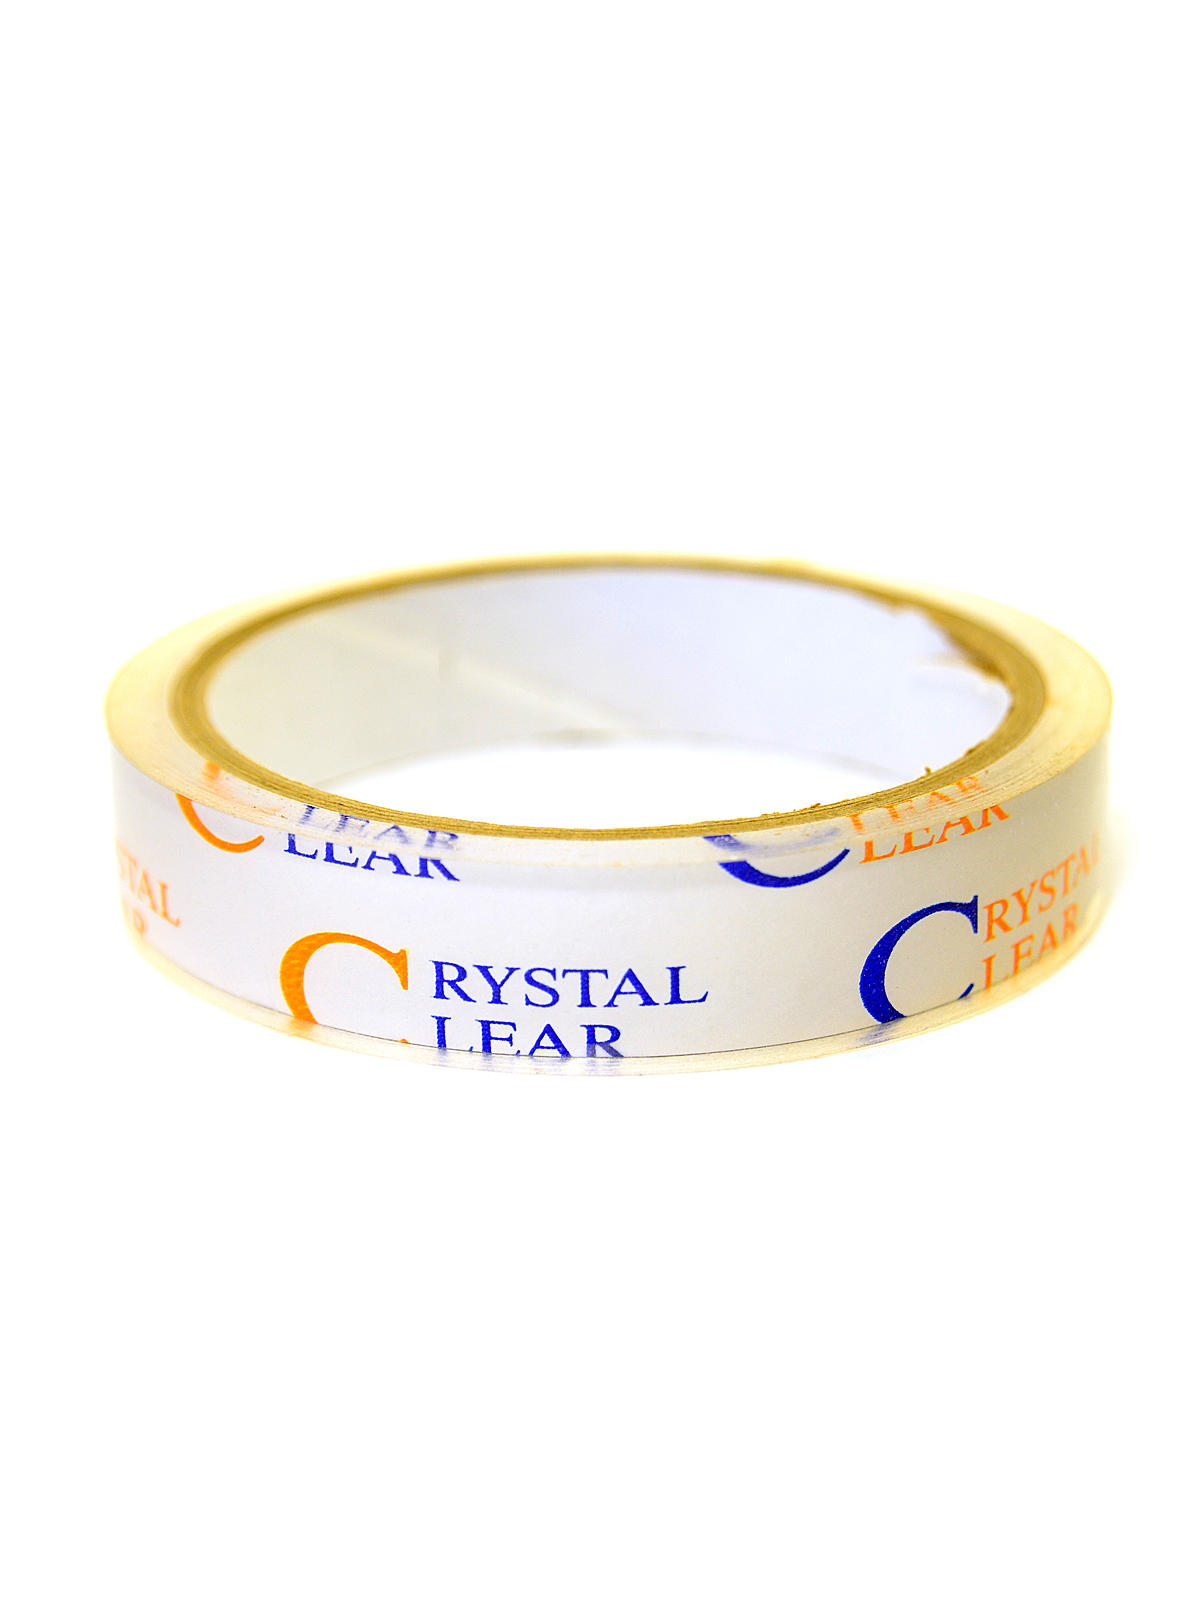 Crystal Clear Tape 3 4 In. X 2592 In. Refill With 3 In. Core